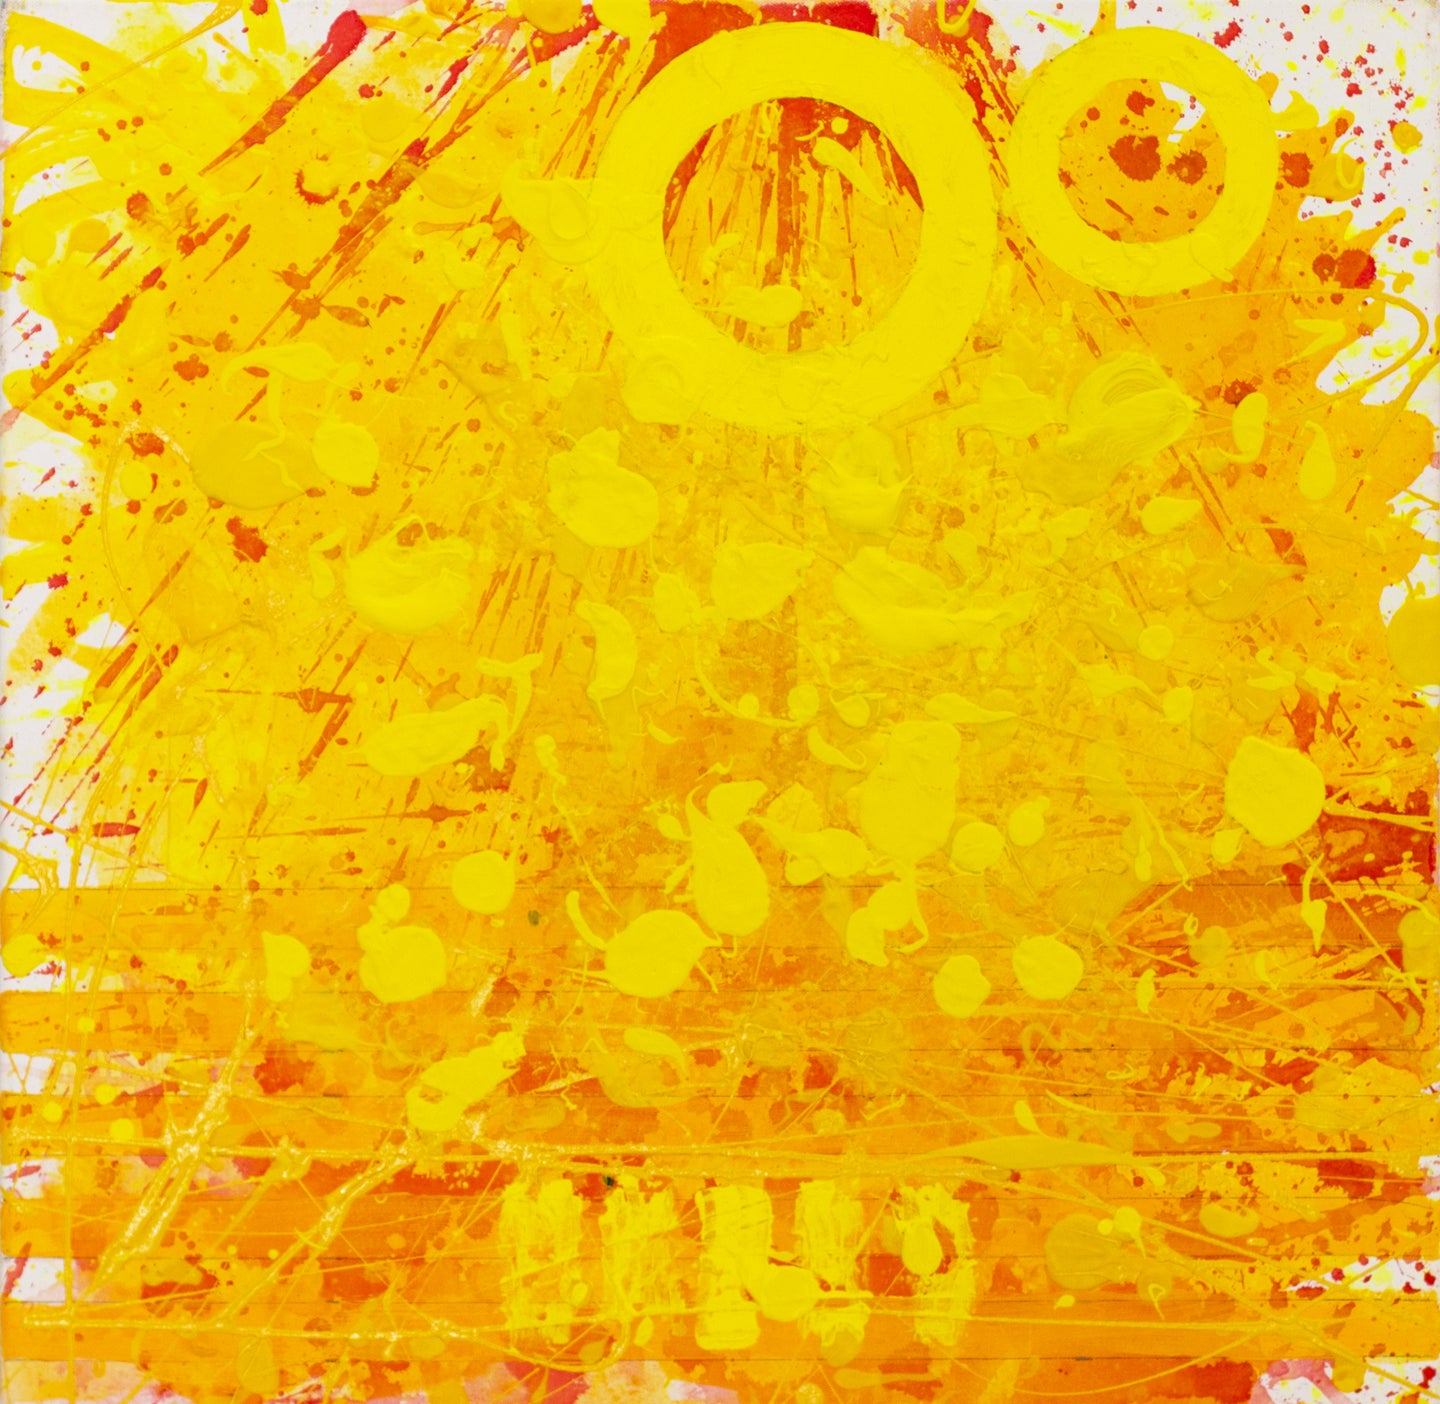 J. Steven Manolis, Sunshine (24.24.01), 2020, acrylic and latex enamel on canvas, 24 x 24 inches, Sunshine art, Yellow Abstract Art for Sale at Manolis Projects Art Gallery, Miami Fl